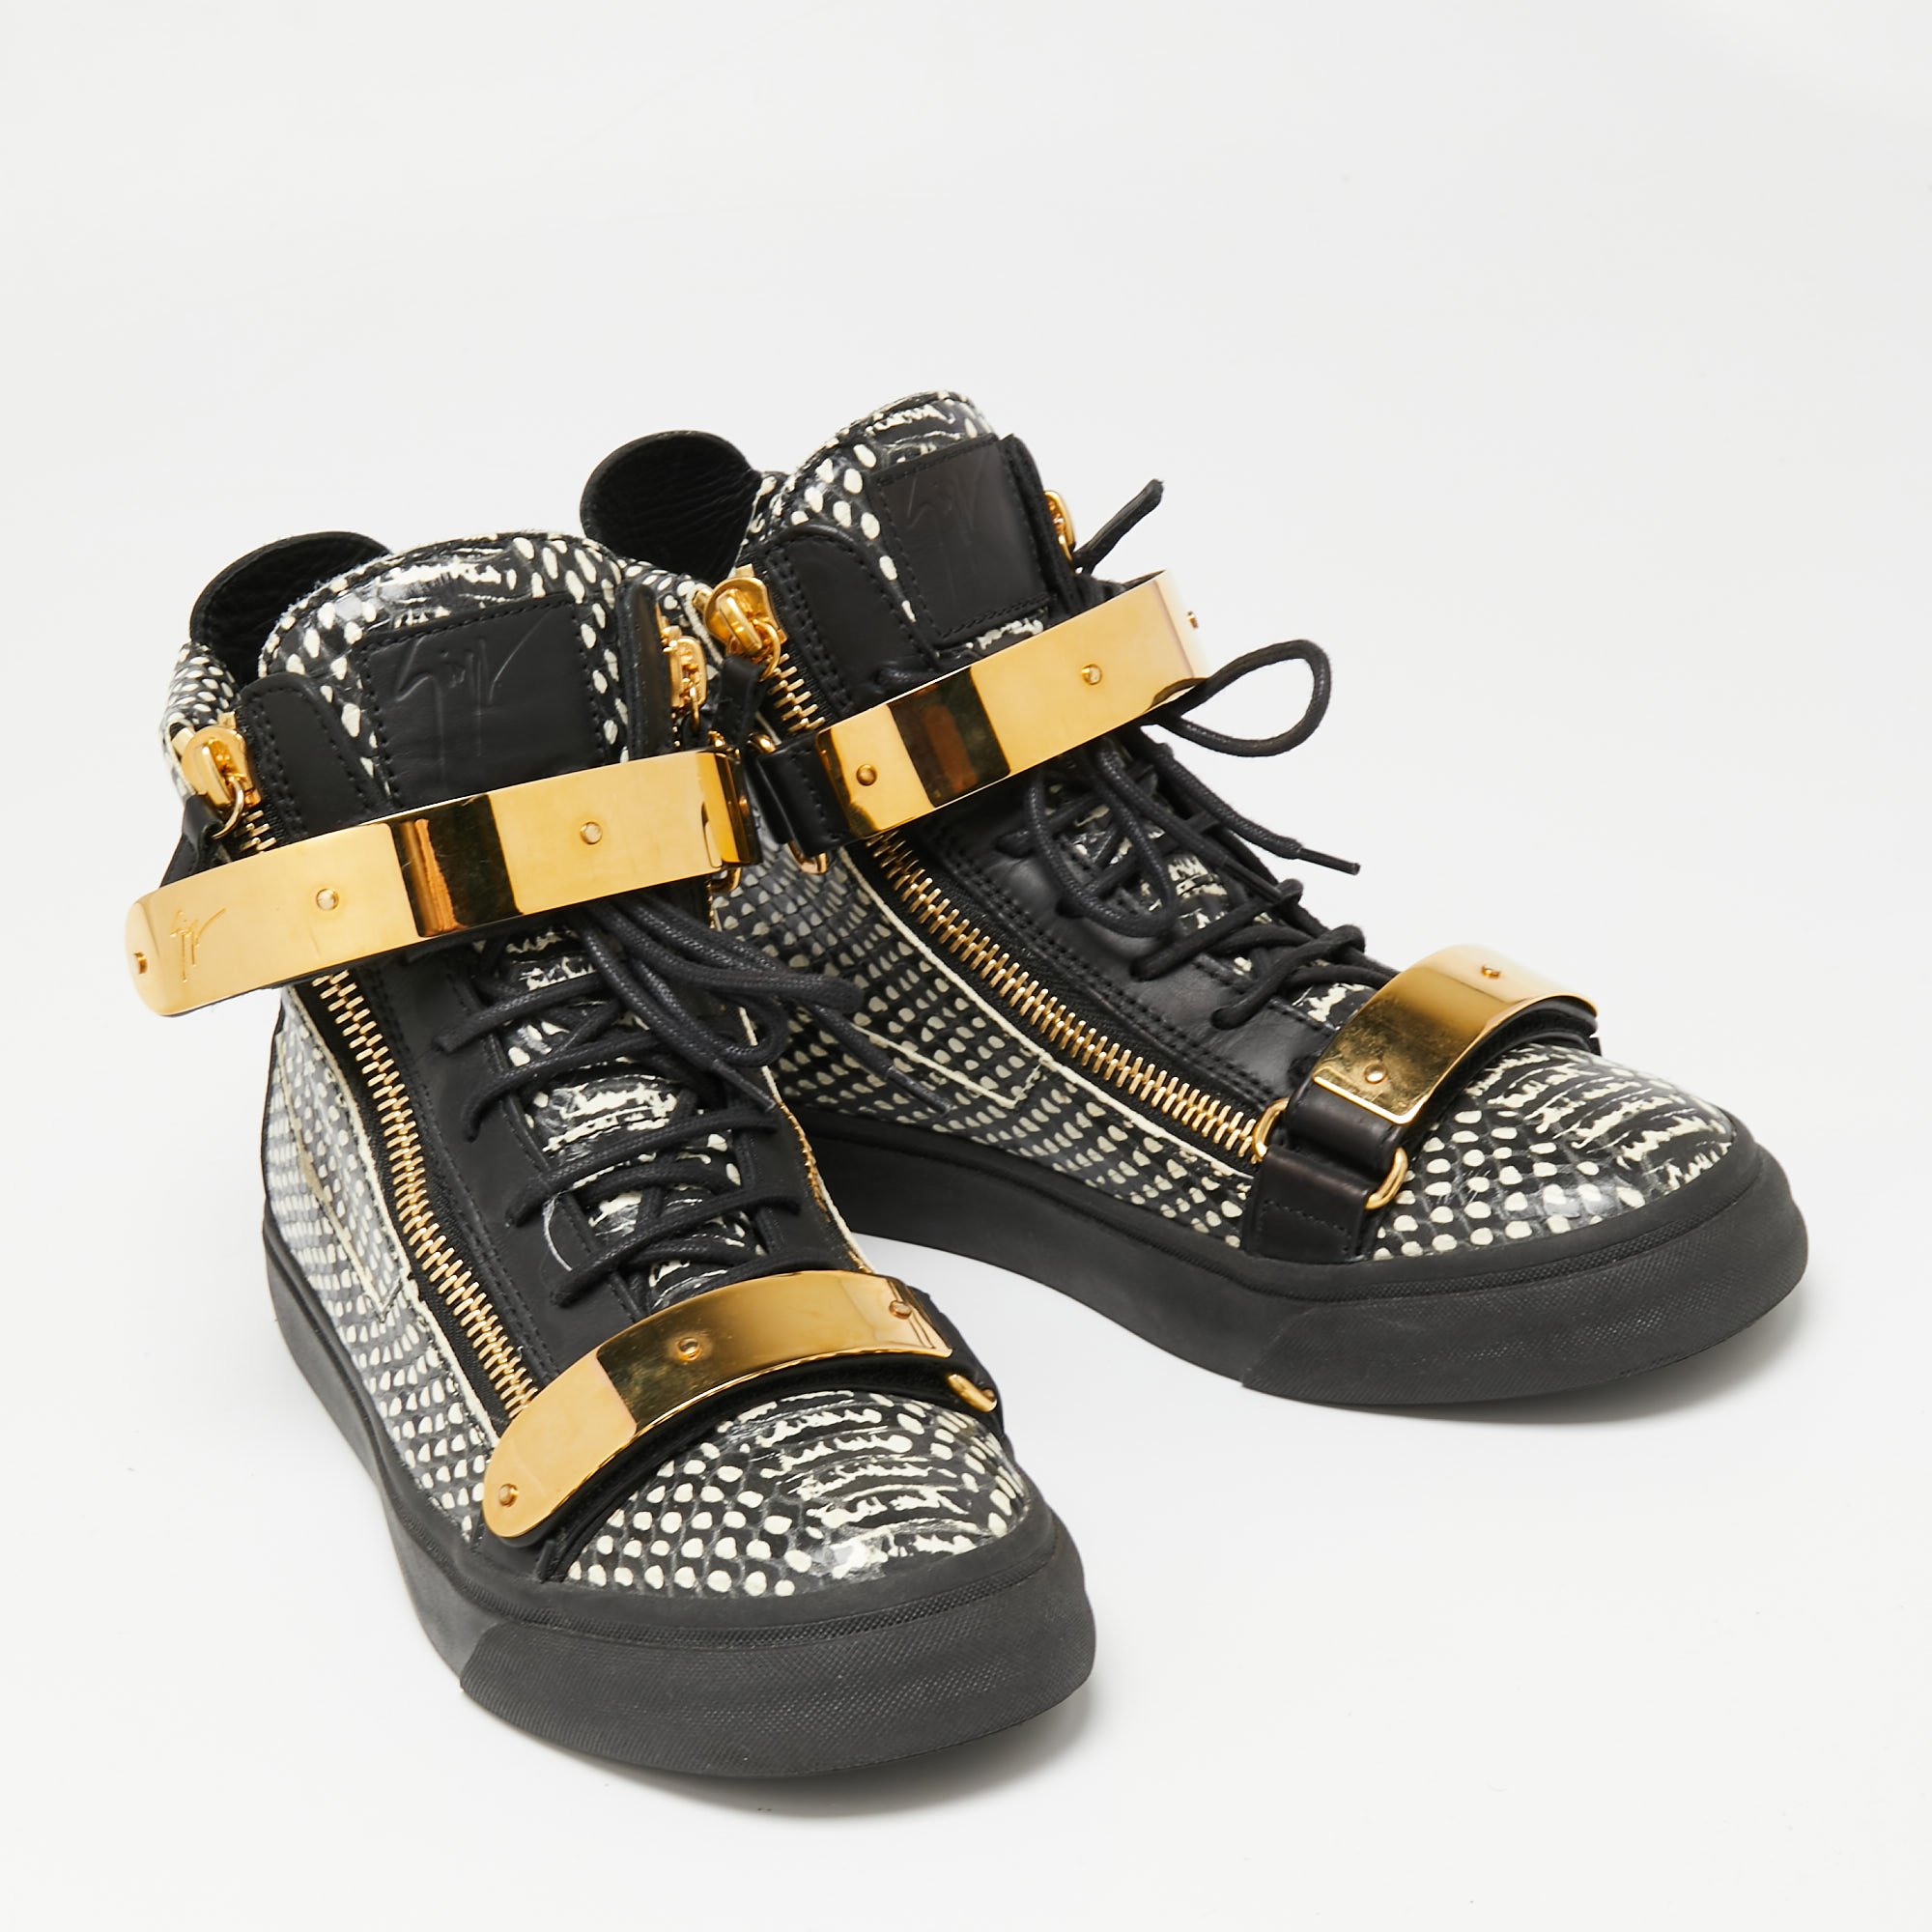 Giuseppe Zanotti Black/White Snakeskin Embossed And Leather High Top Double Zip Sneakers Size 40